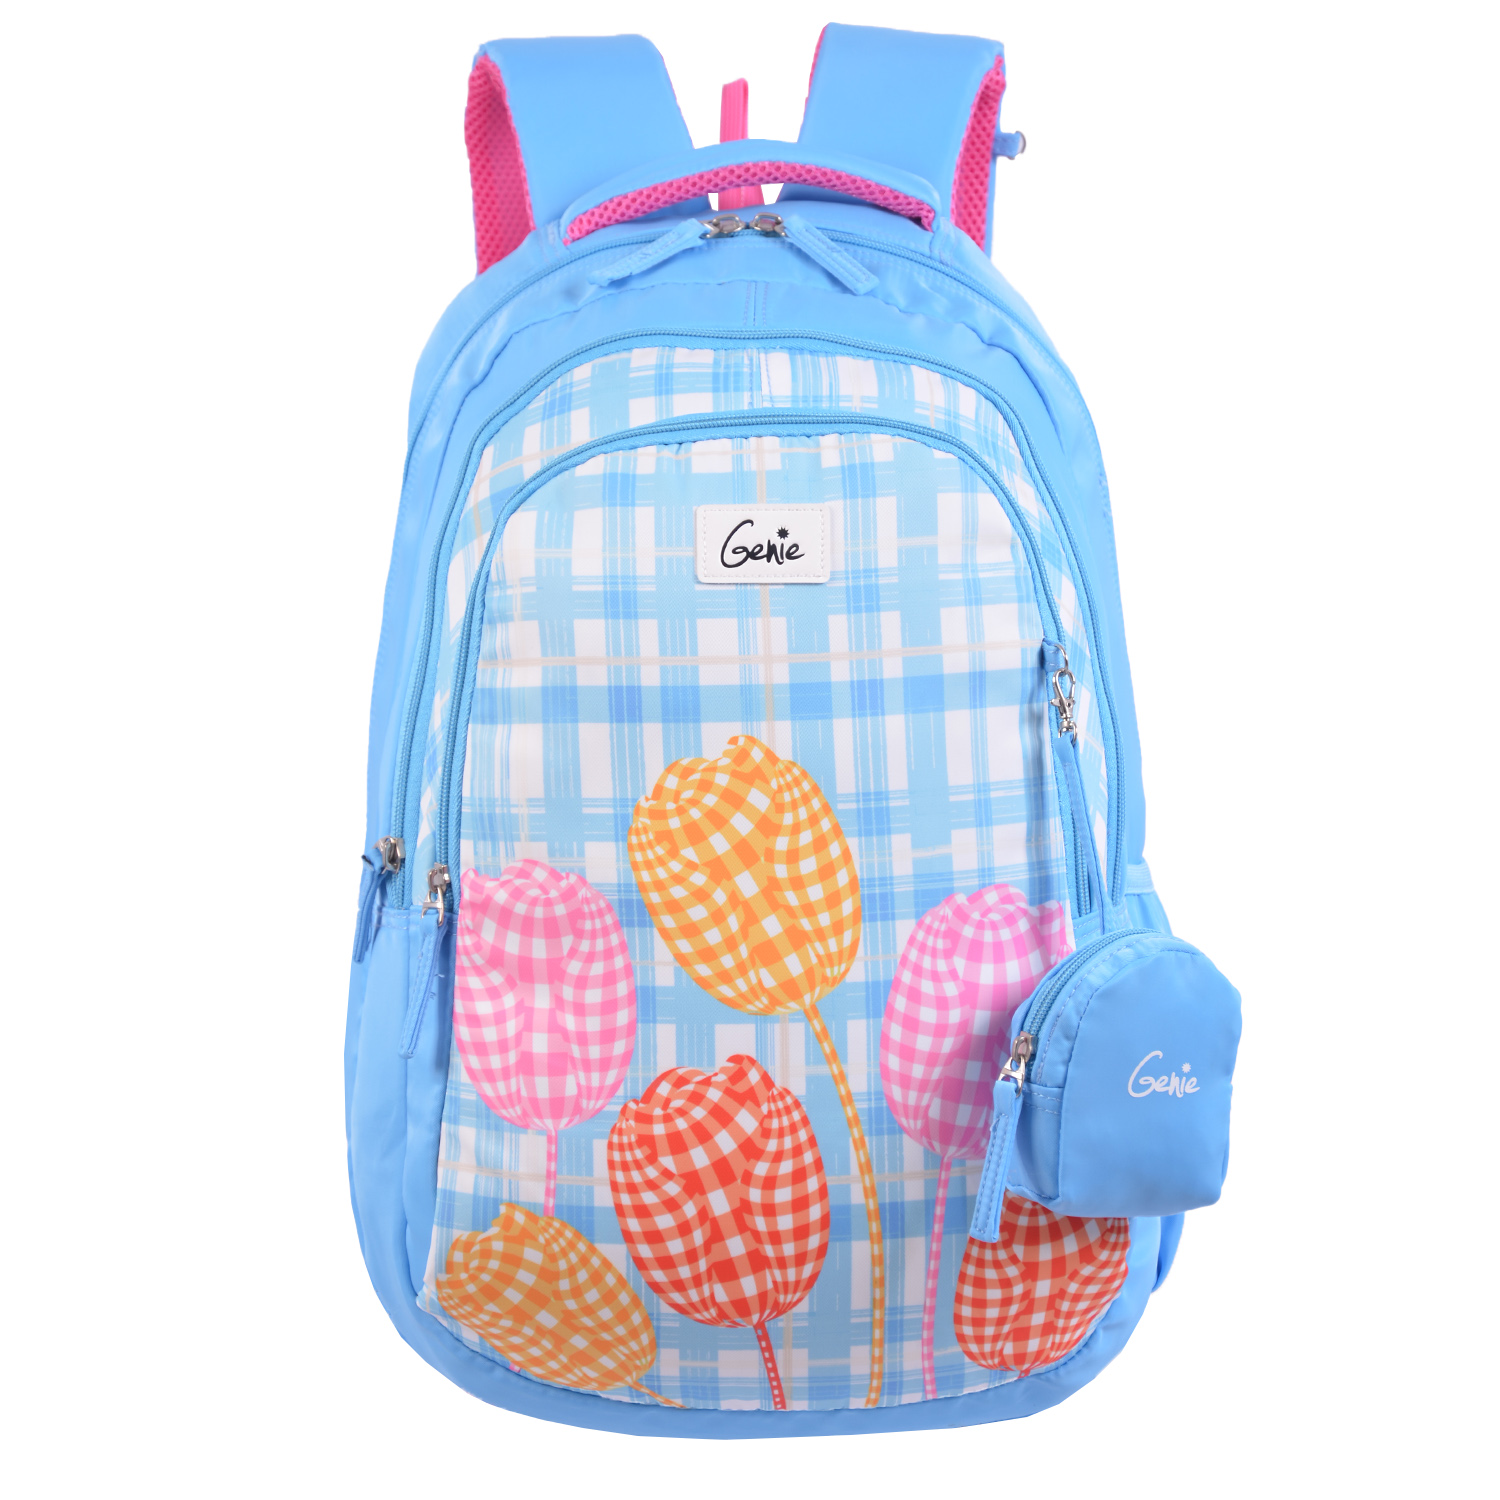 RoshanBags_GENIE 36L KIDS BACKPACK CHLOE 19 BLUE WITH POUCH